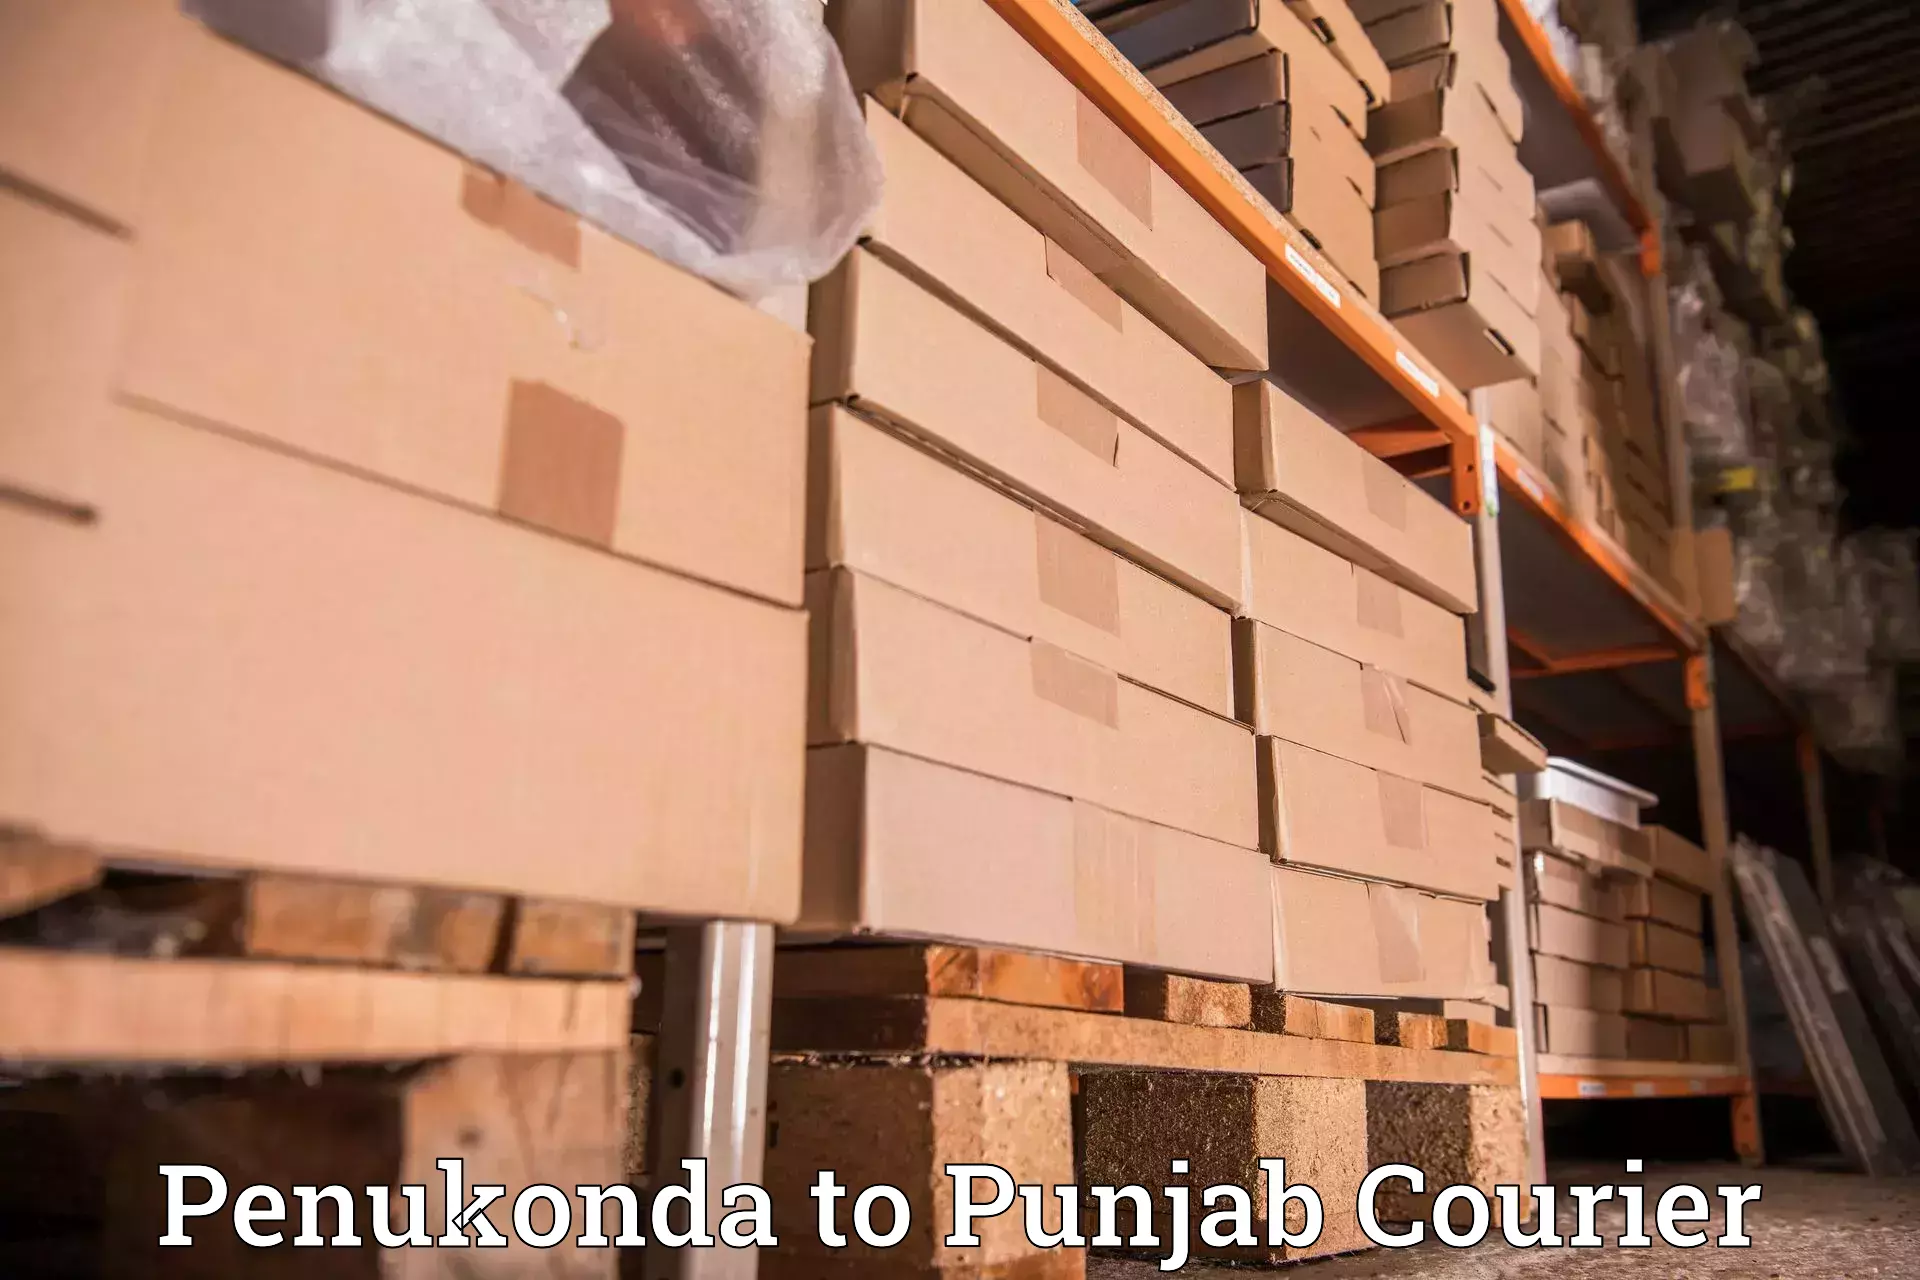 Personal courier services Penukonda to Khanna